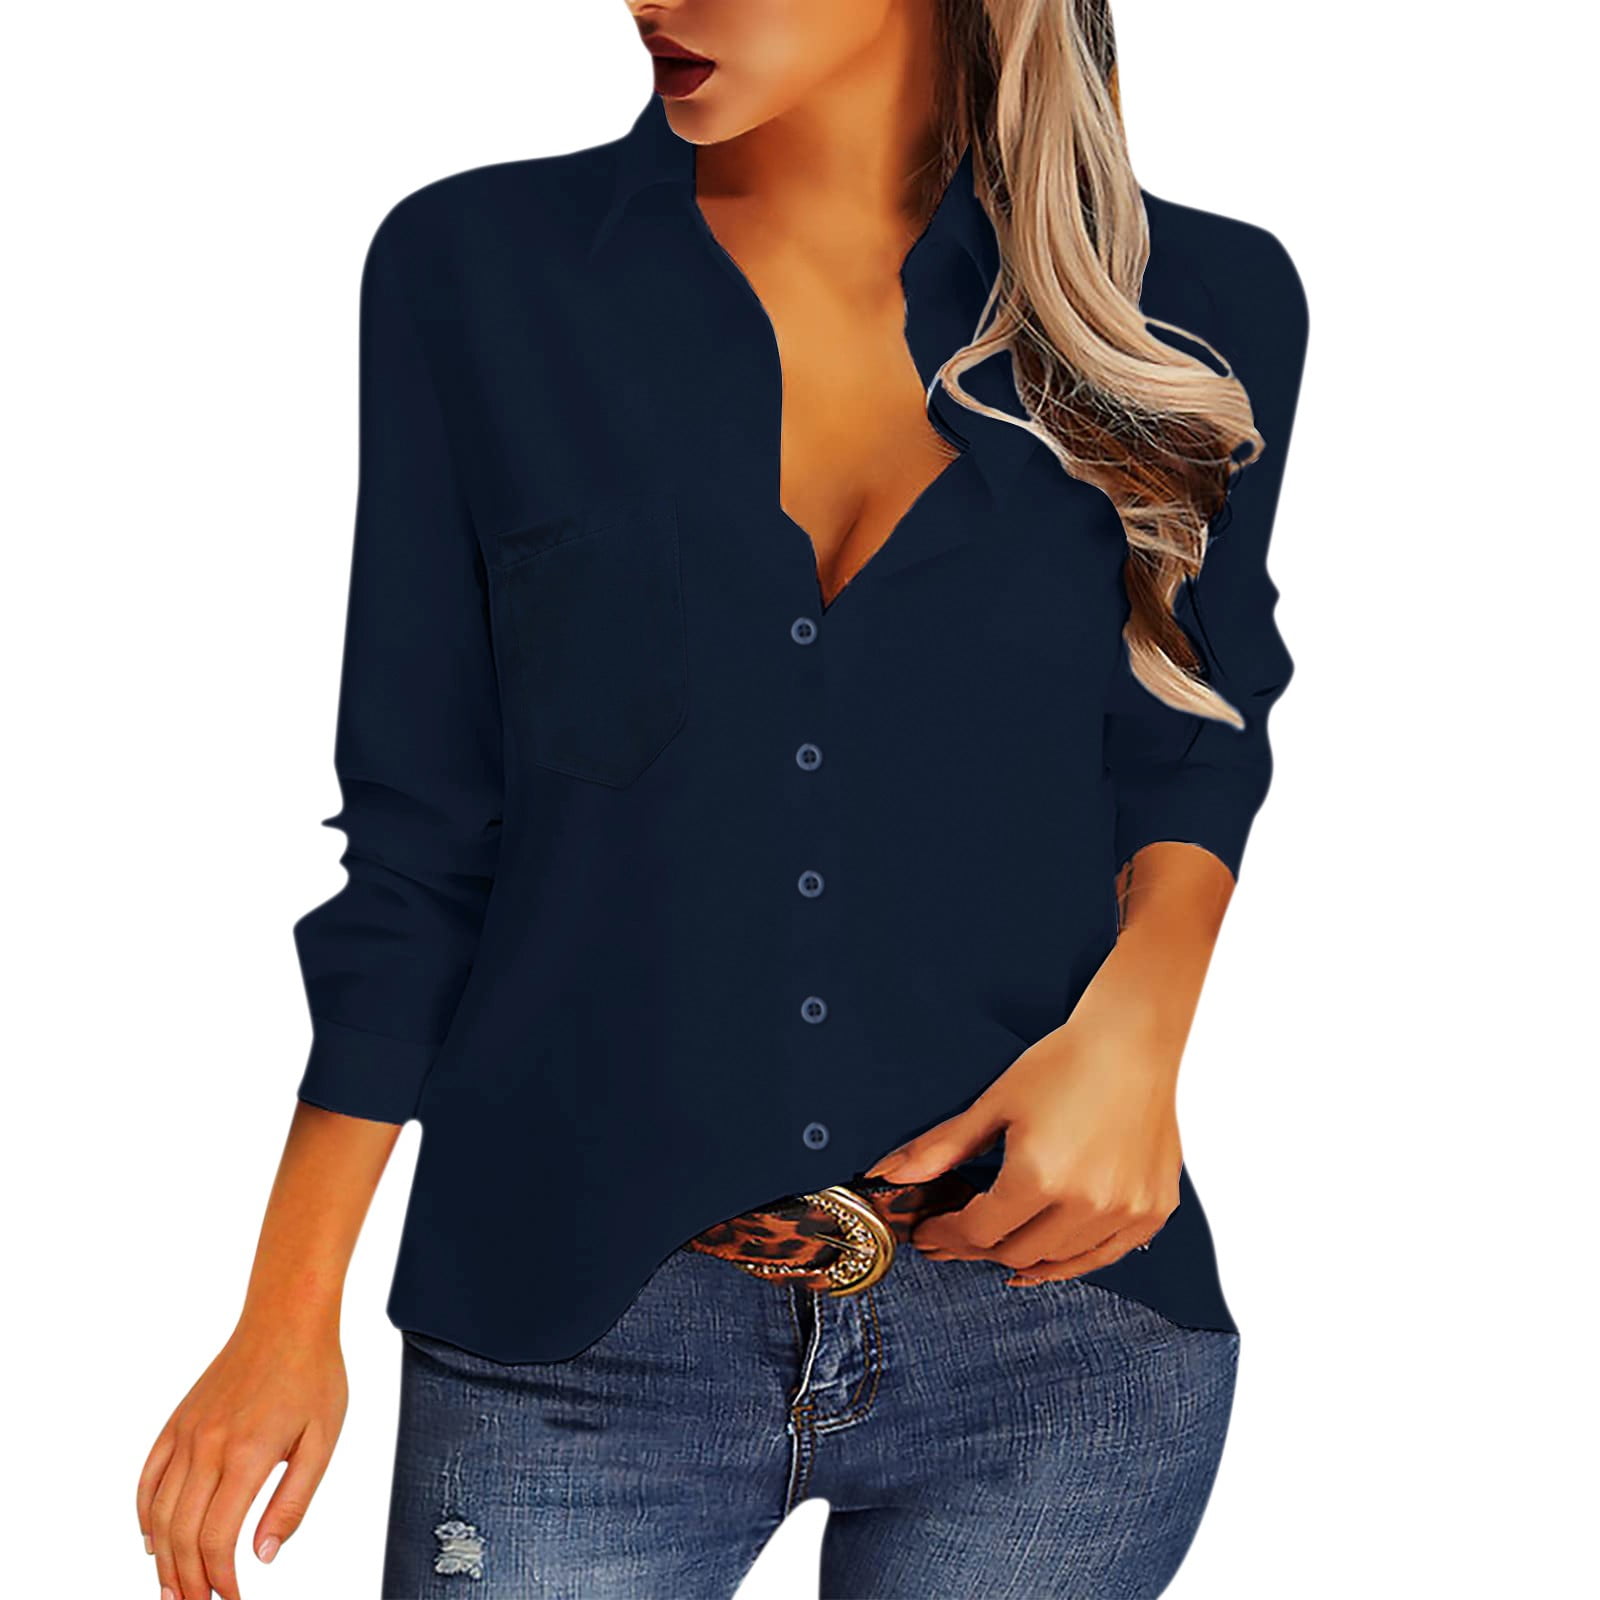 Western Shirts For Women Long S1eeve Button Down Collar Shirt Solid ...